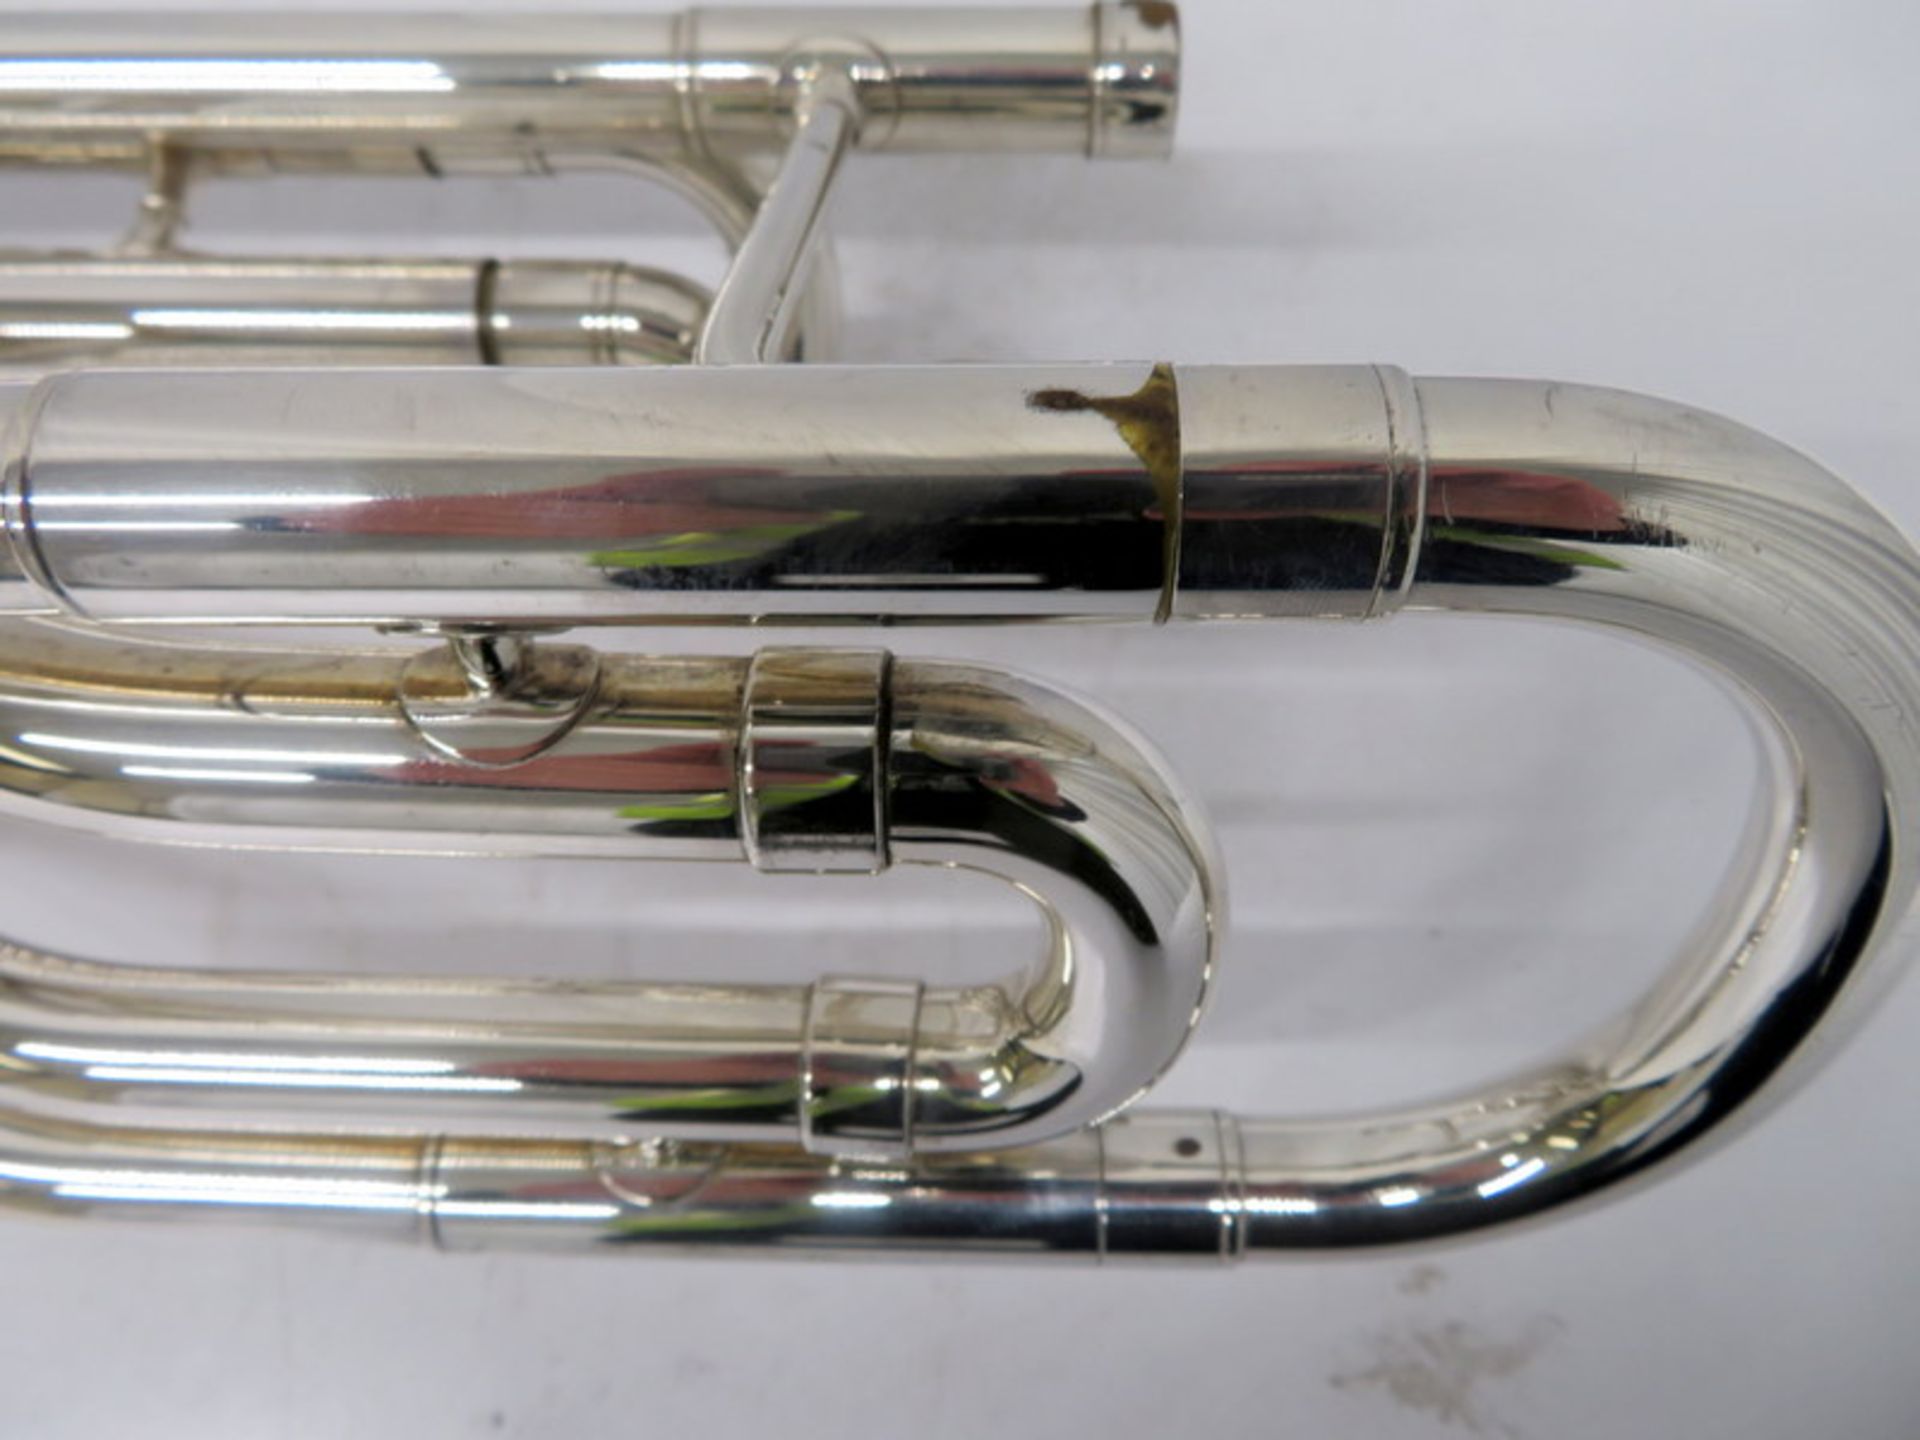 Besson 708 Fanfare Trumpet With Case. Serial Number: 838496. Please Note This Item Has Not - Image 10 of 17